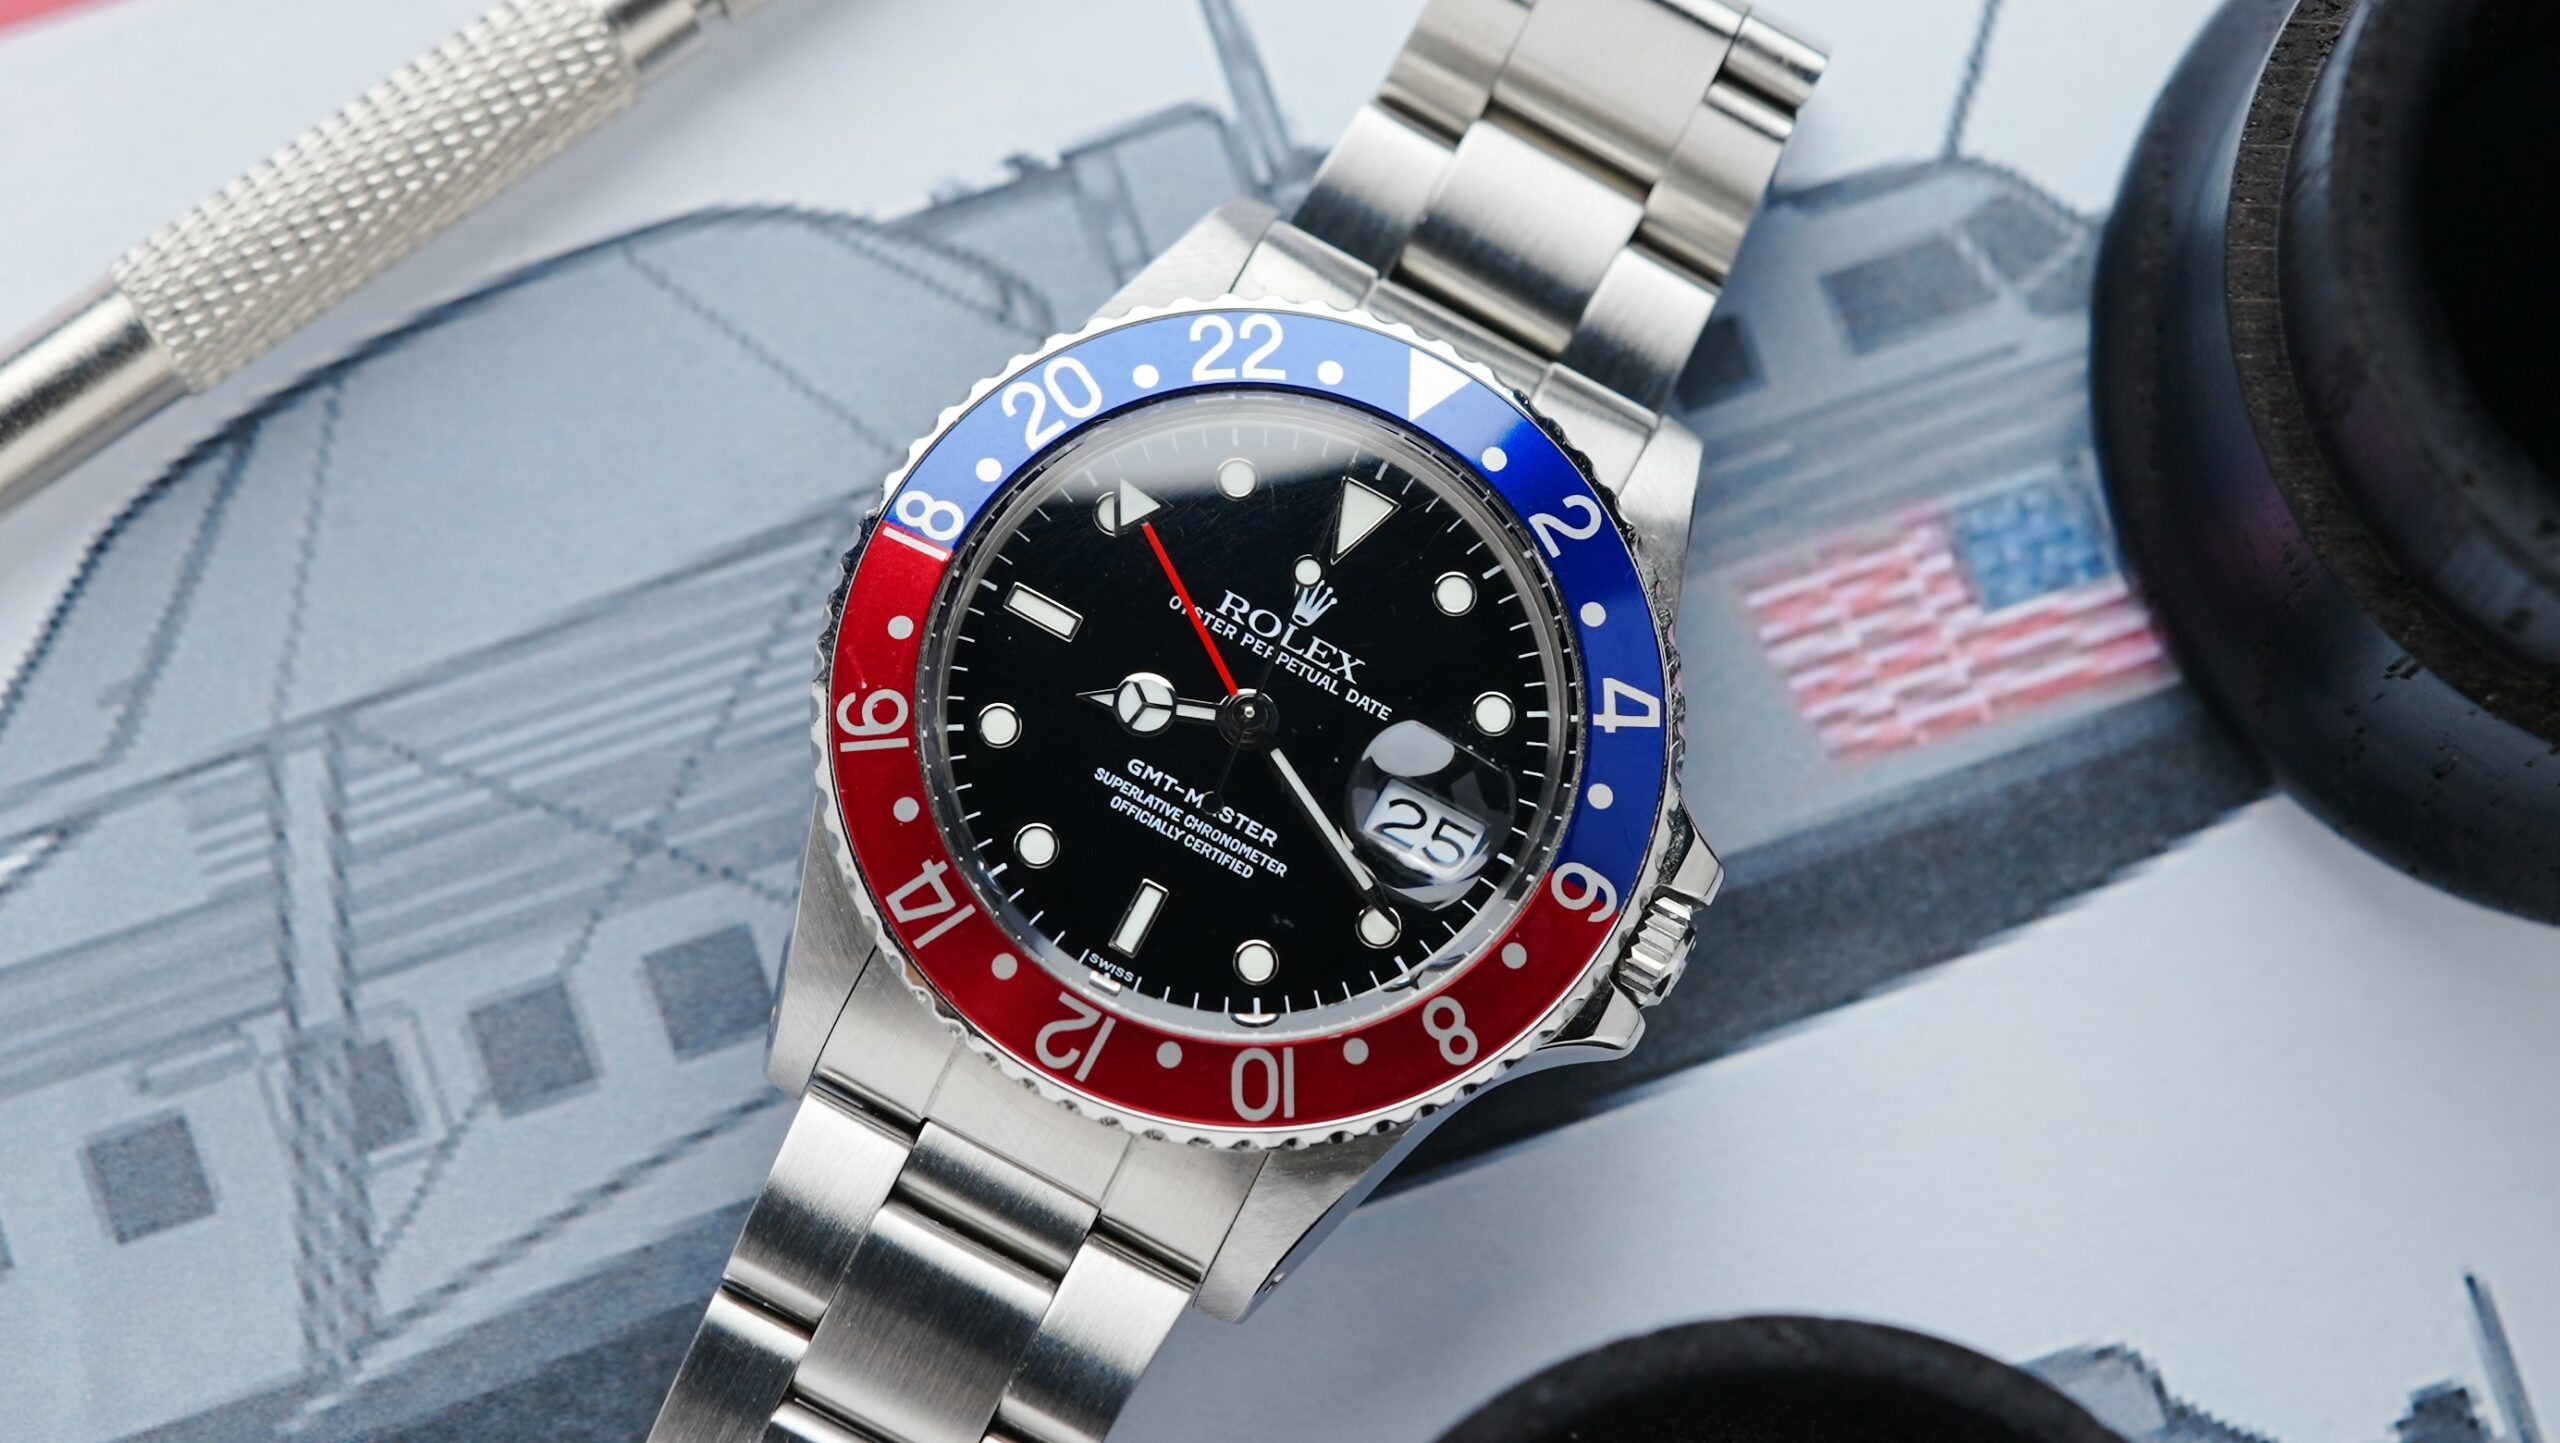 Rolex GMT-Master Pepsi watch displayed with picture of jet in background.